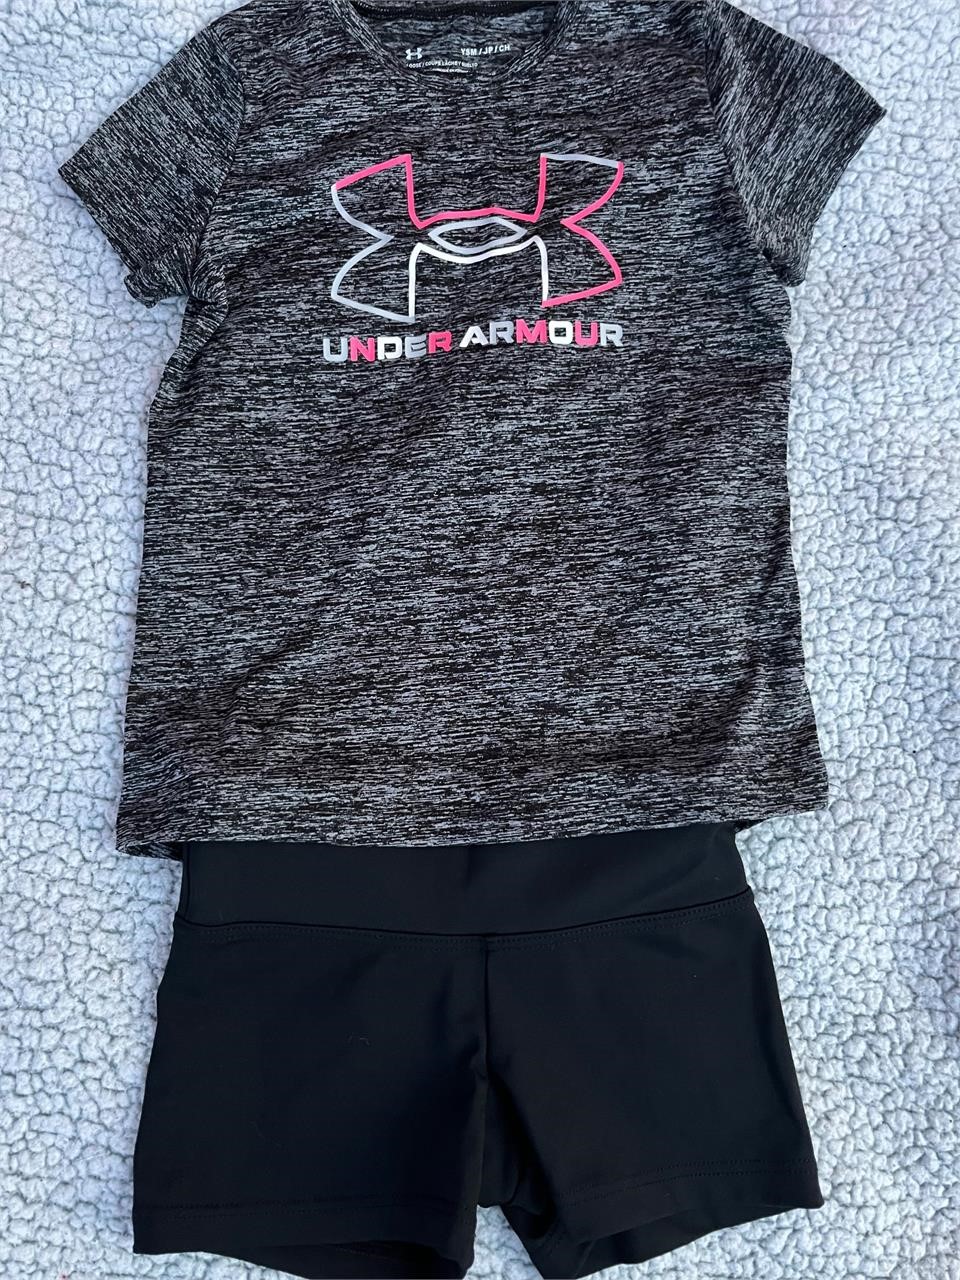 Youth Small Under Armour Shirt w/black shorts